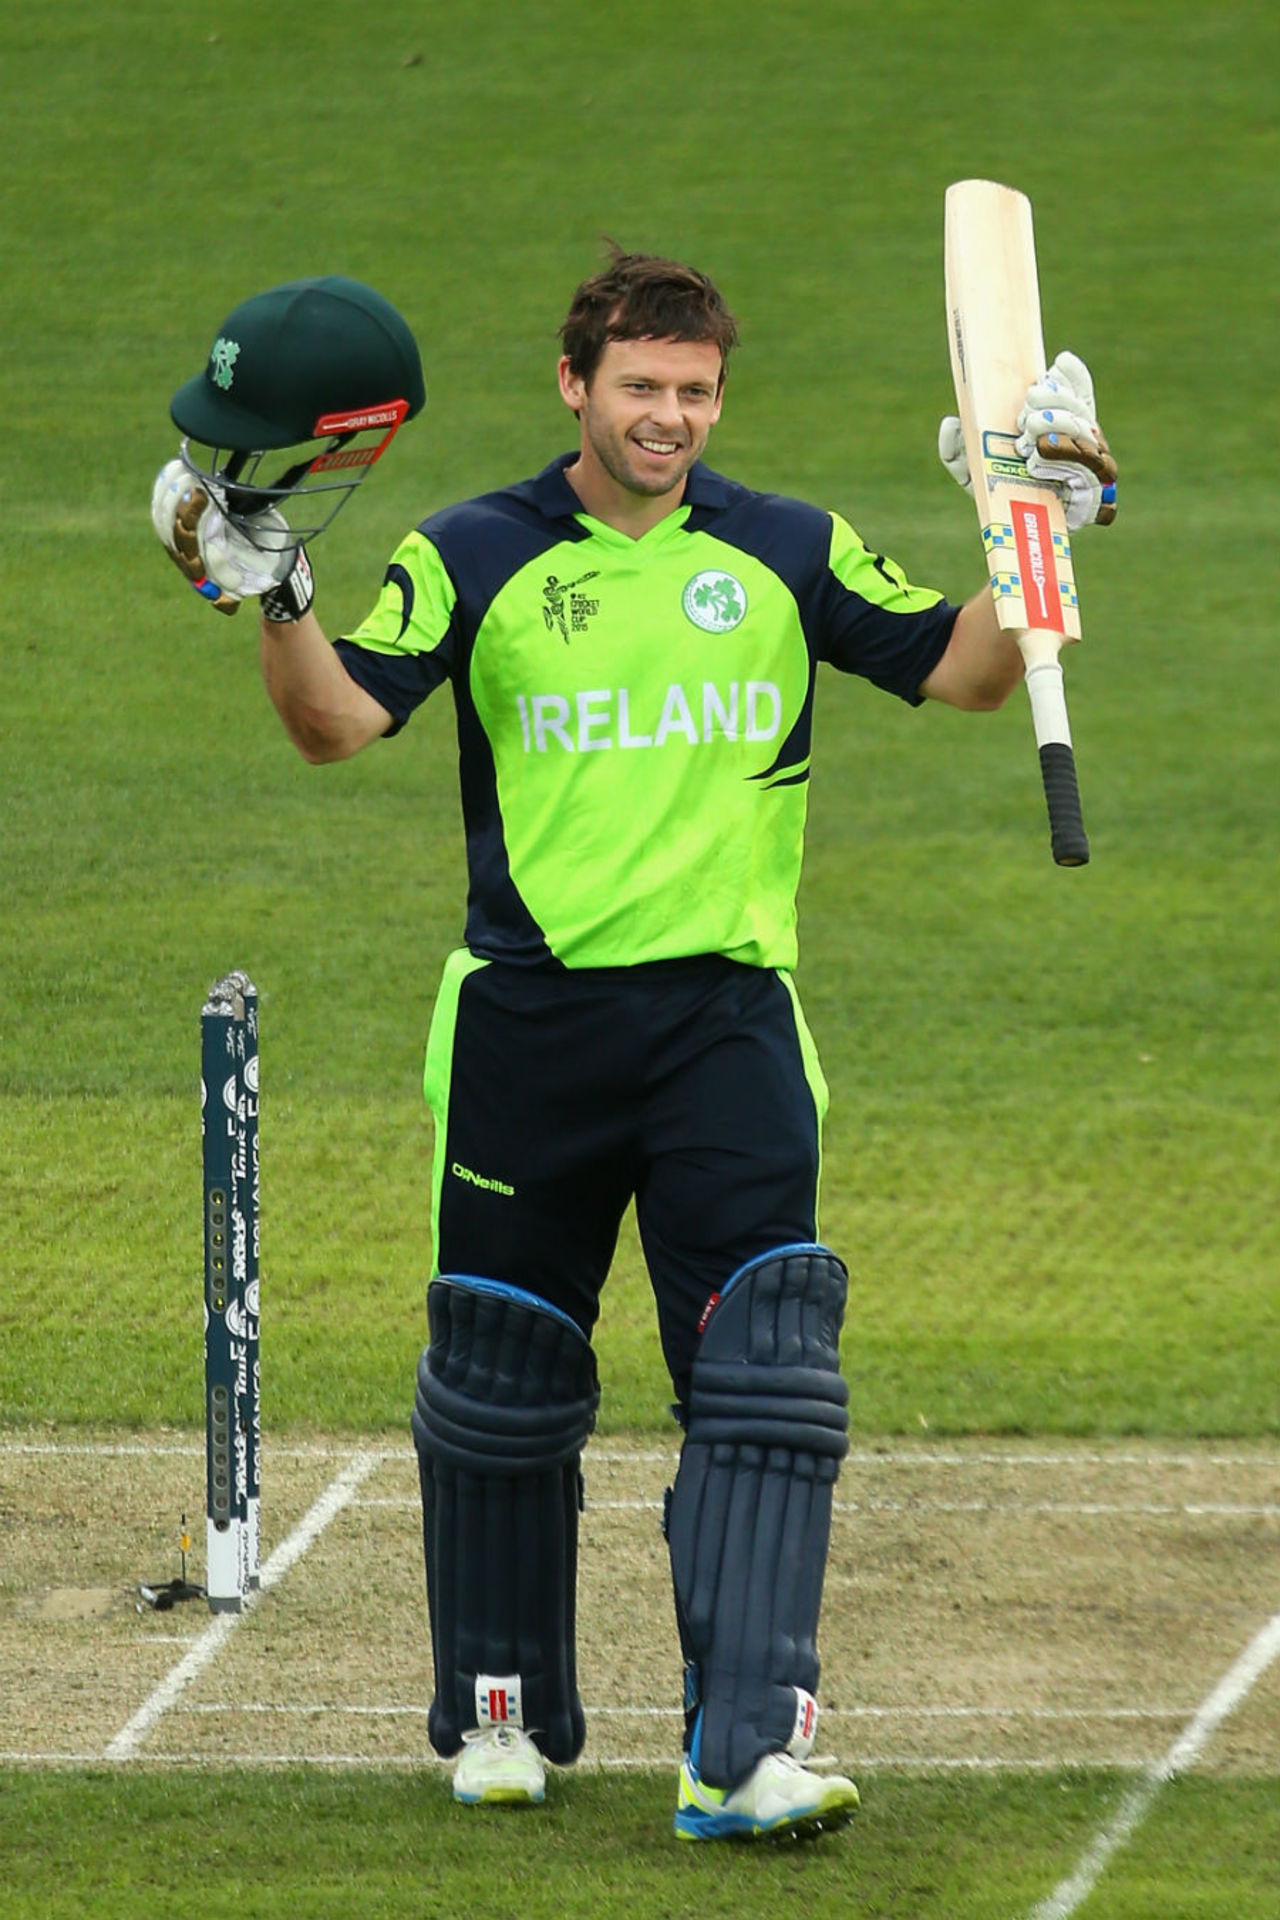 Ed Joyce struck three sixes and nine fours in his 103-ball 112, Ireland v Zimbabwe, World Cup 2015, Group B, Hobart, March 7, 2015